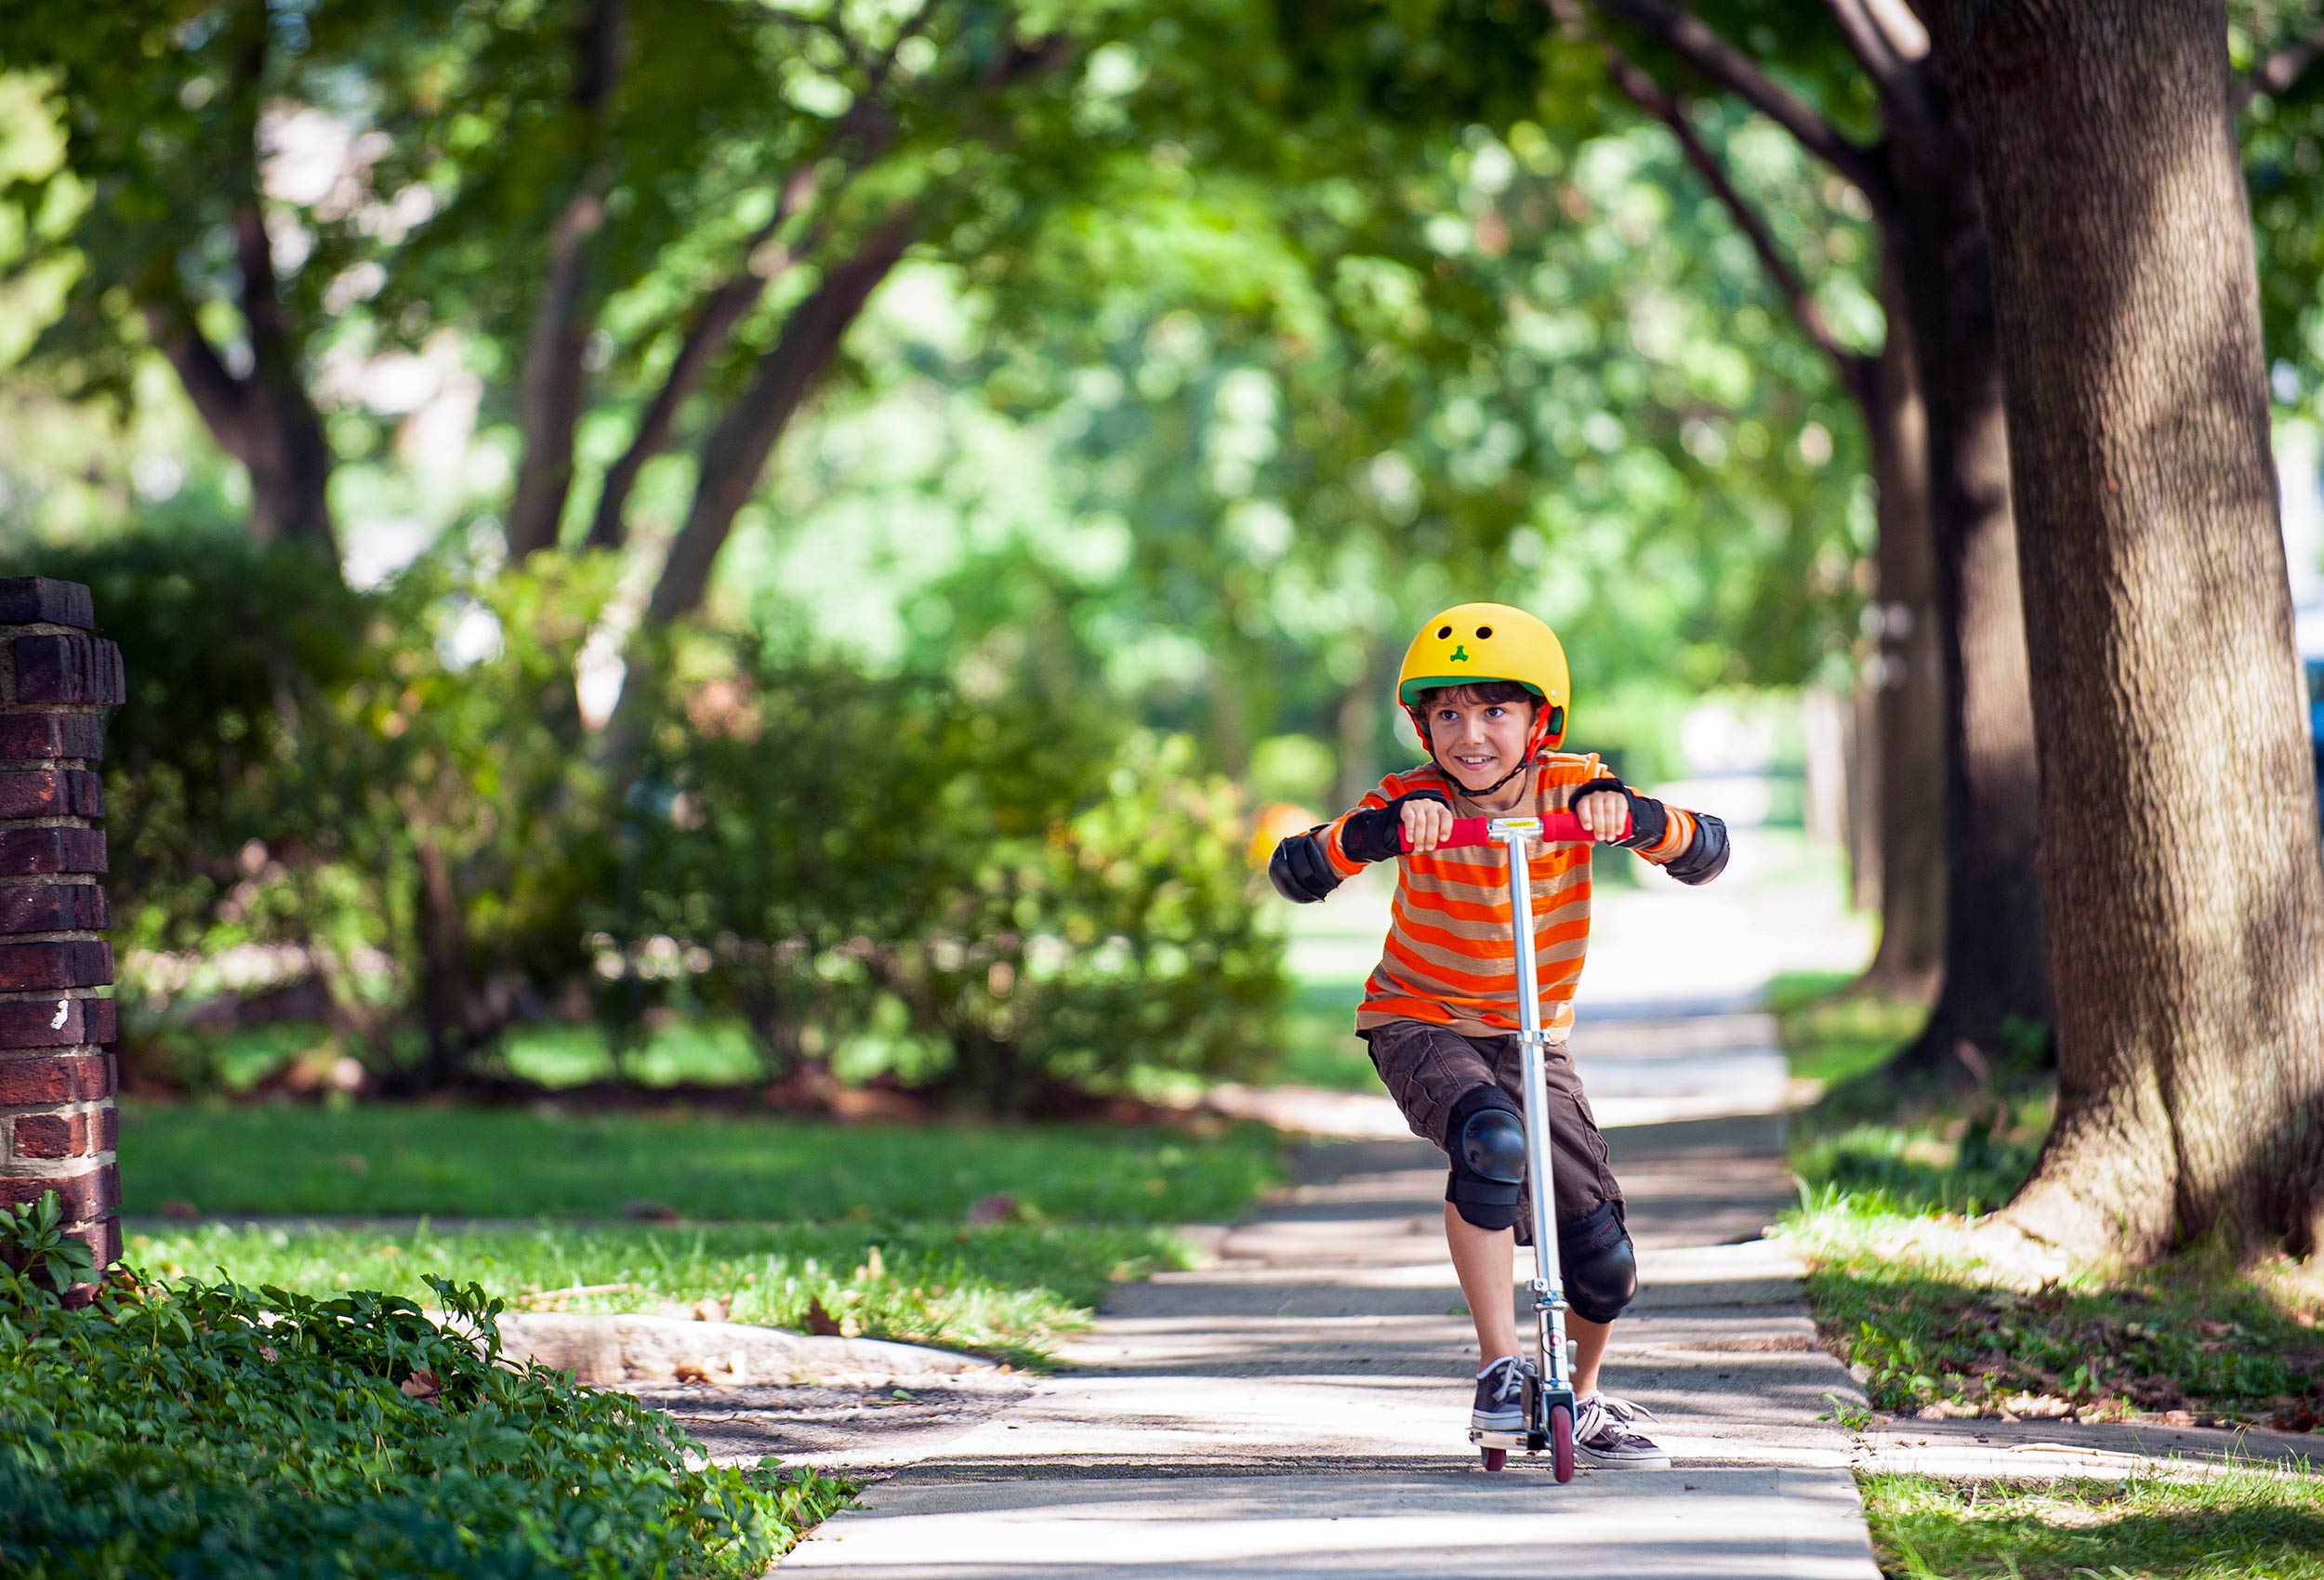 Boy rides scooter in suburbs - lifestyle advertising campaign for Children